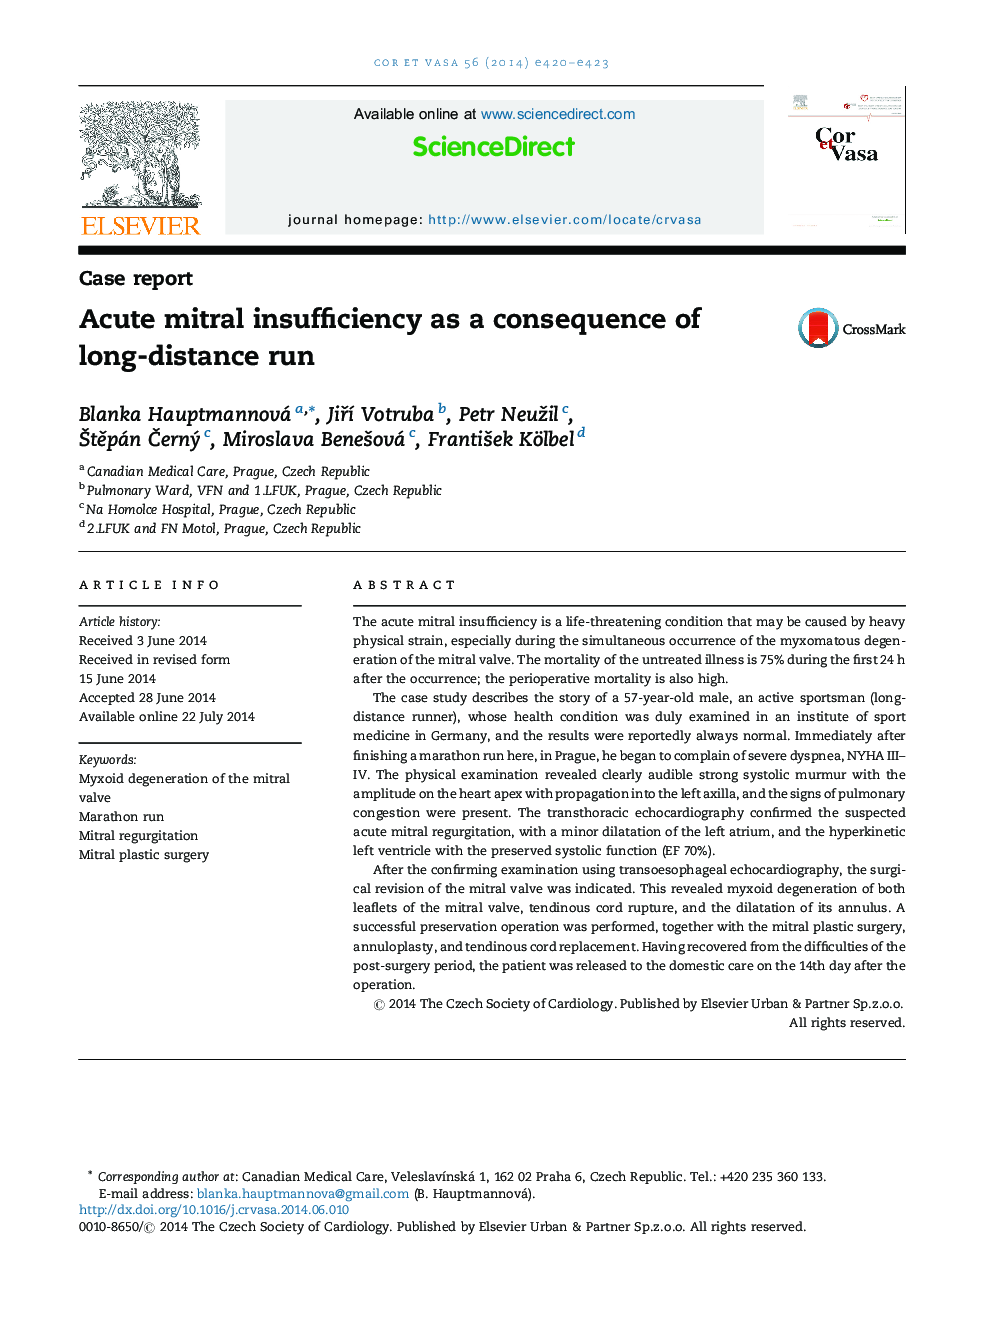 Acute mitral insufficiency as a consequence of long-distance run